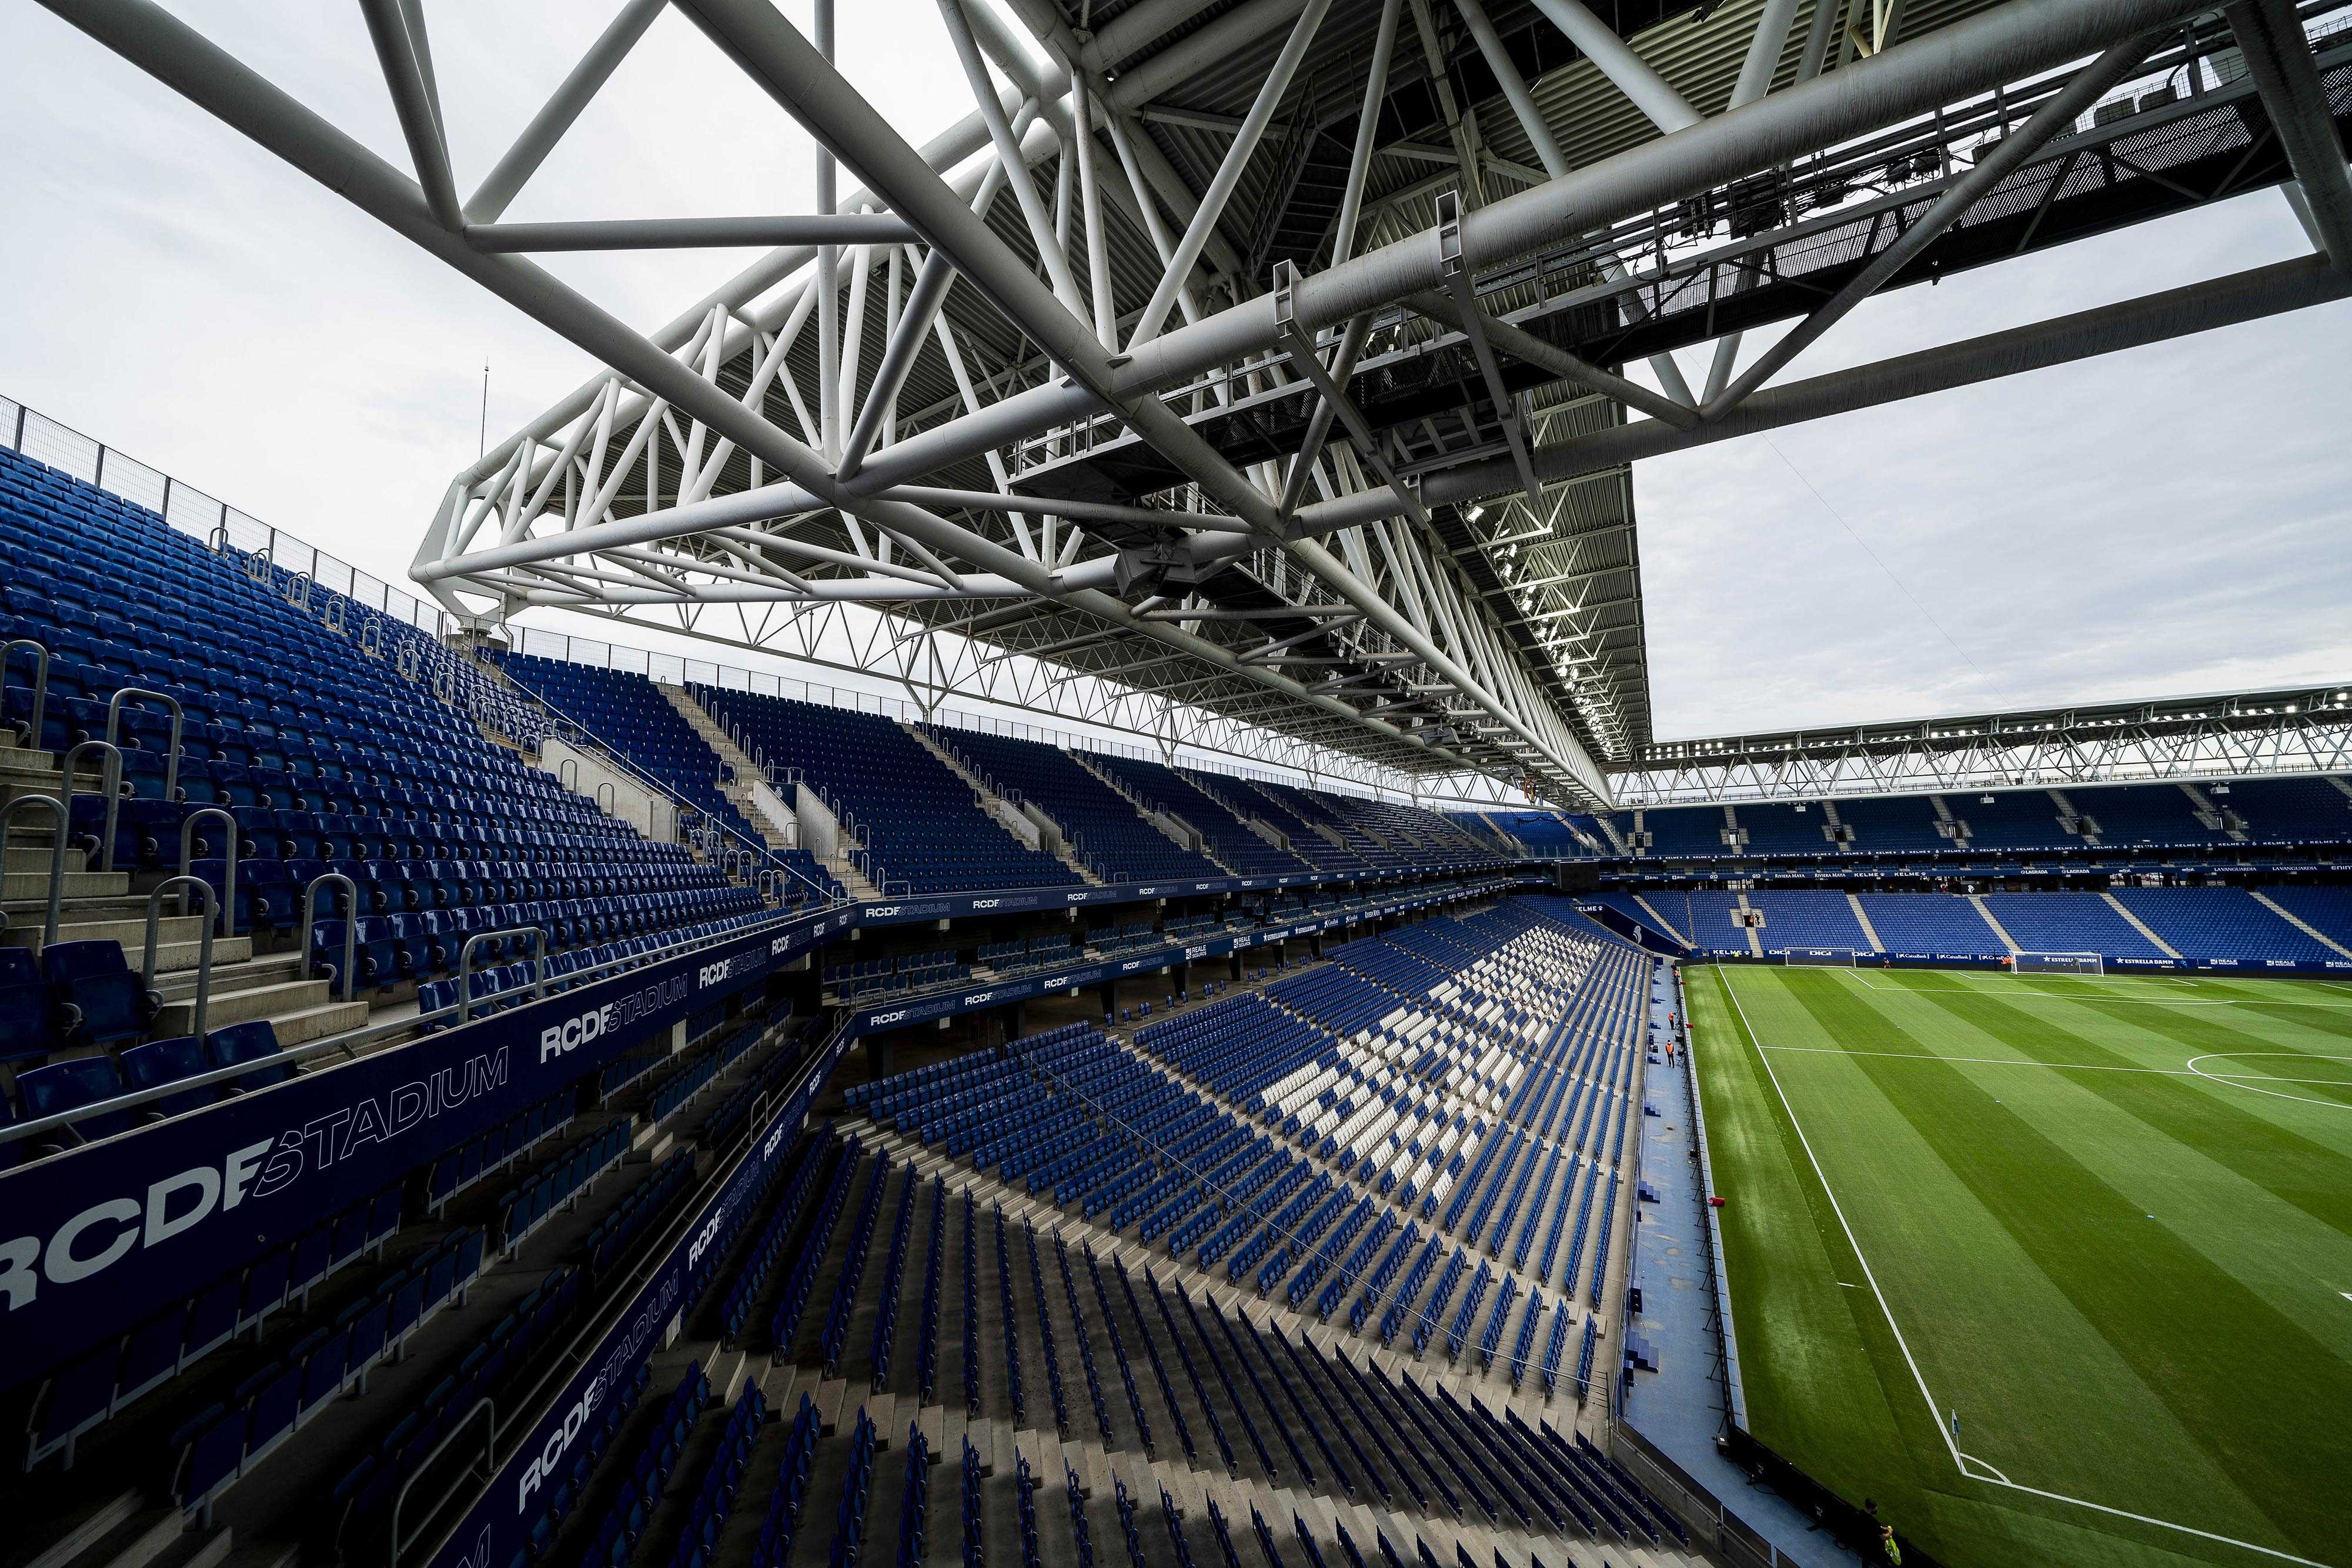 RCDE Stadium amongst proposed venues for 2030 World Cup